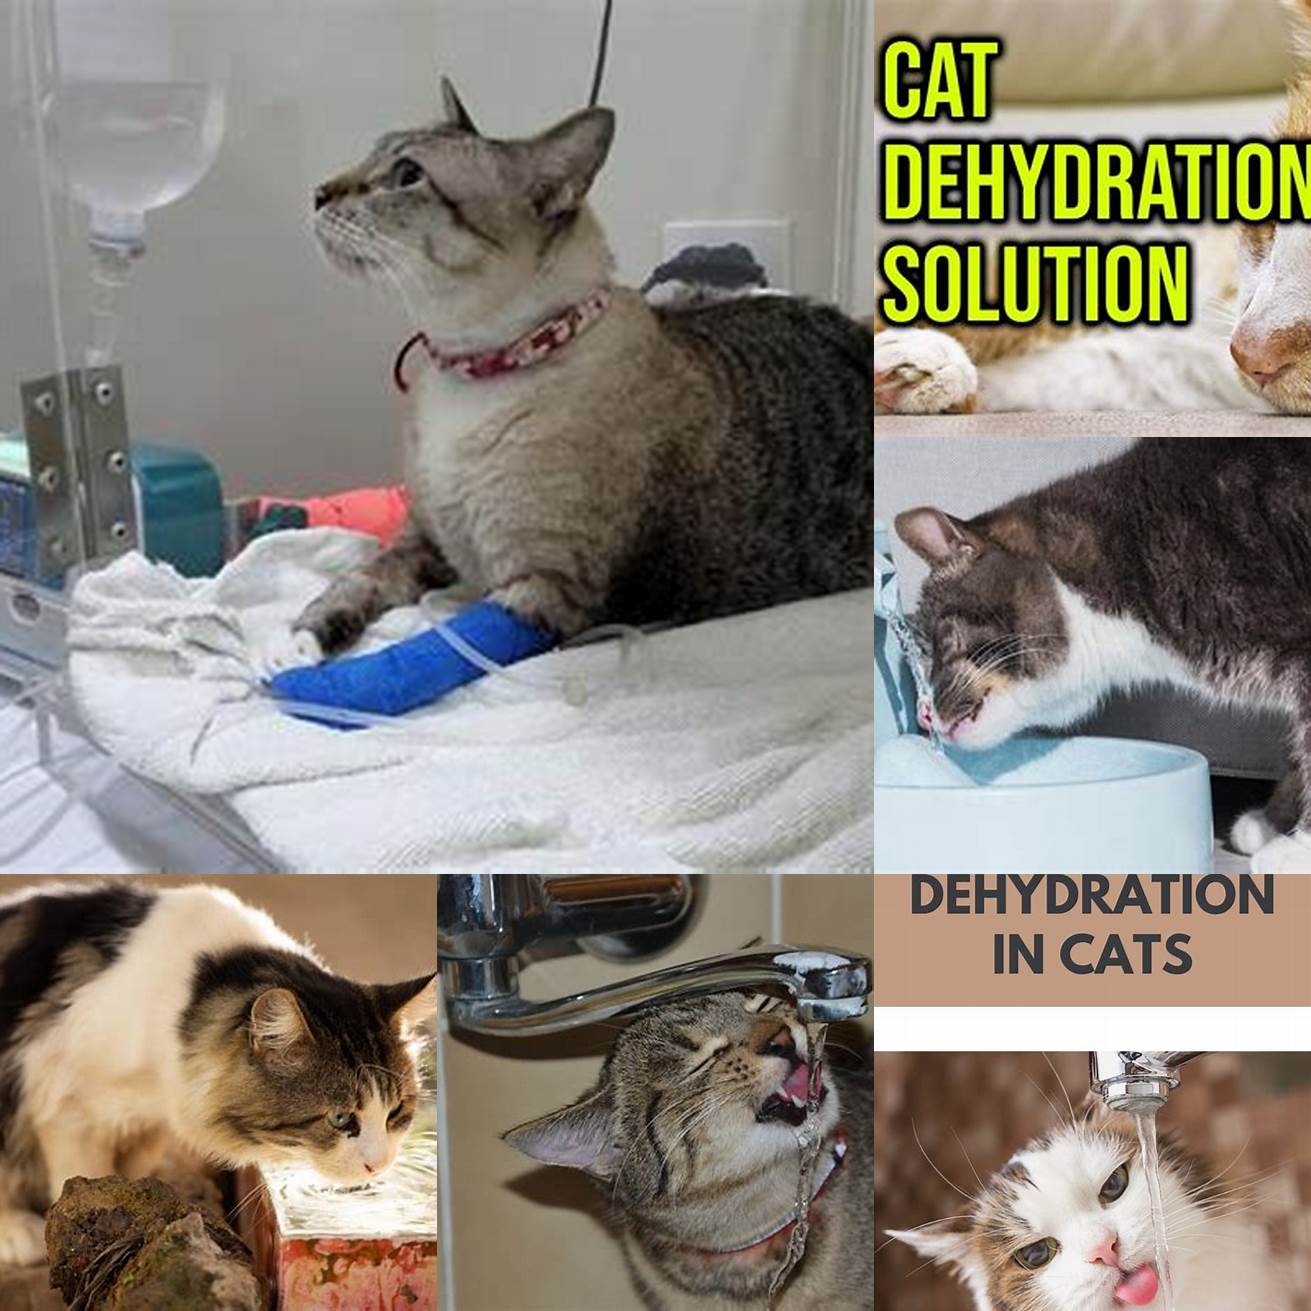 Dehydration Enemas can cause cats to become dehydrated which can lead to serious health issues